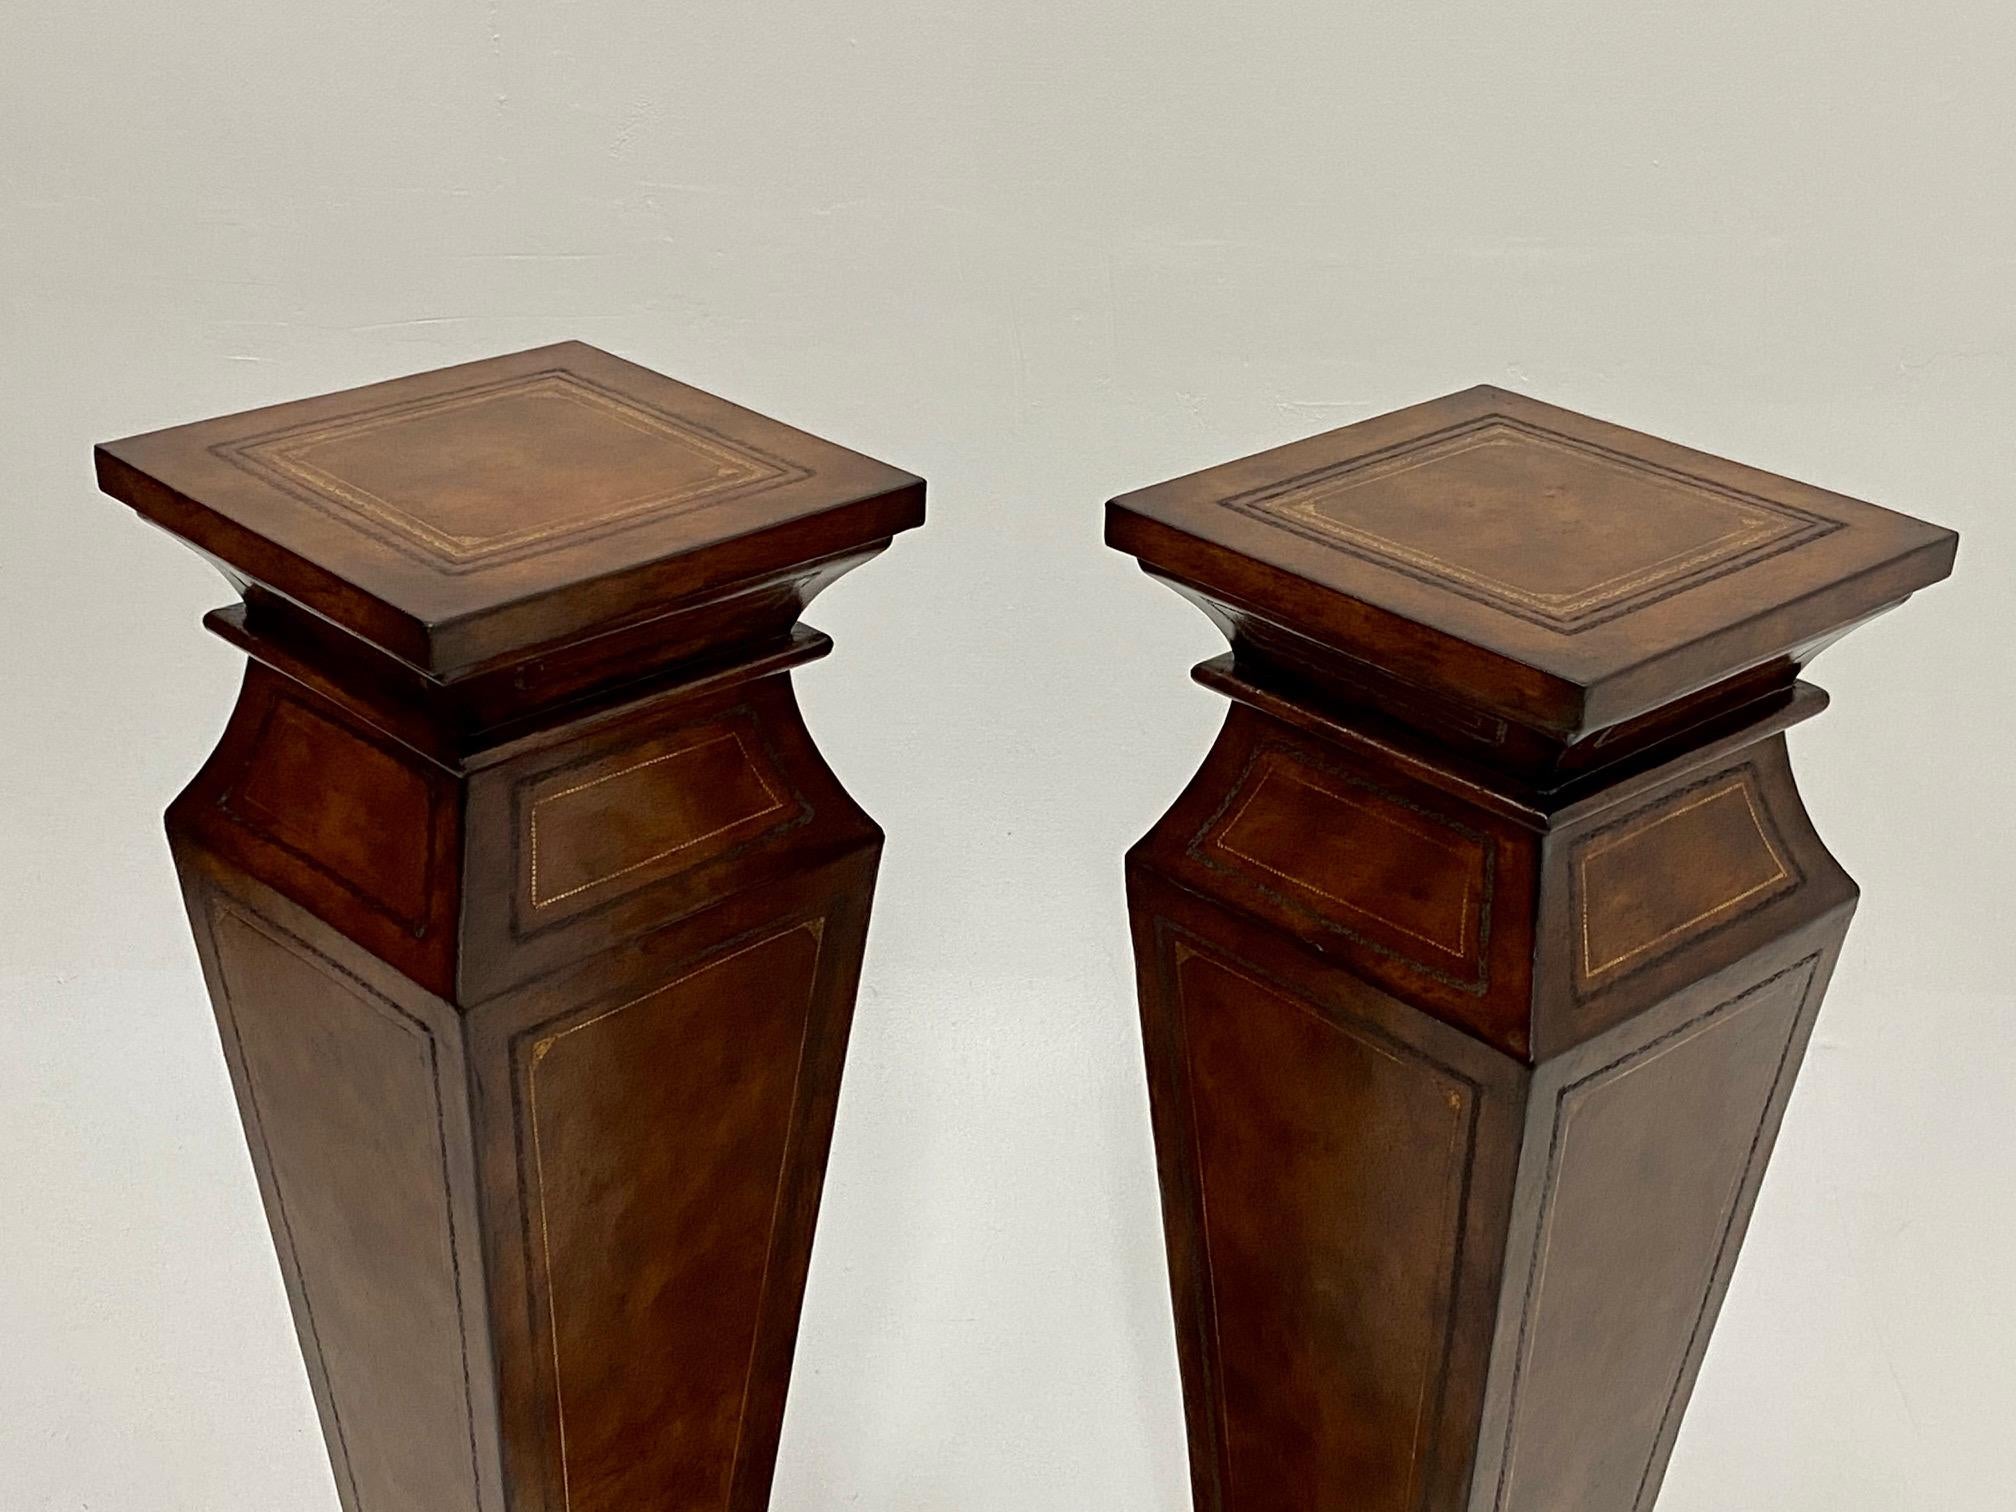 Very handsome large pair of leather wrapped pedestals with beautiful gold embossing.